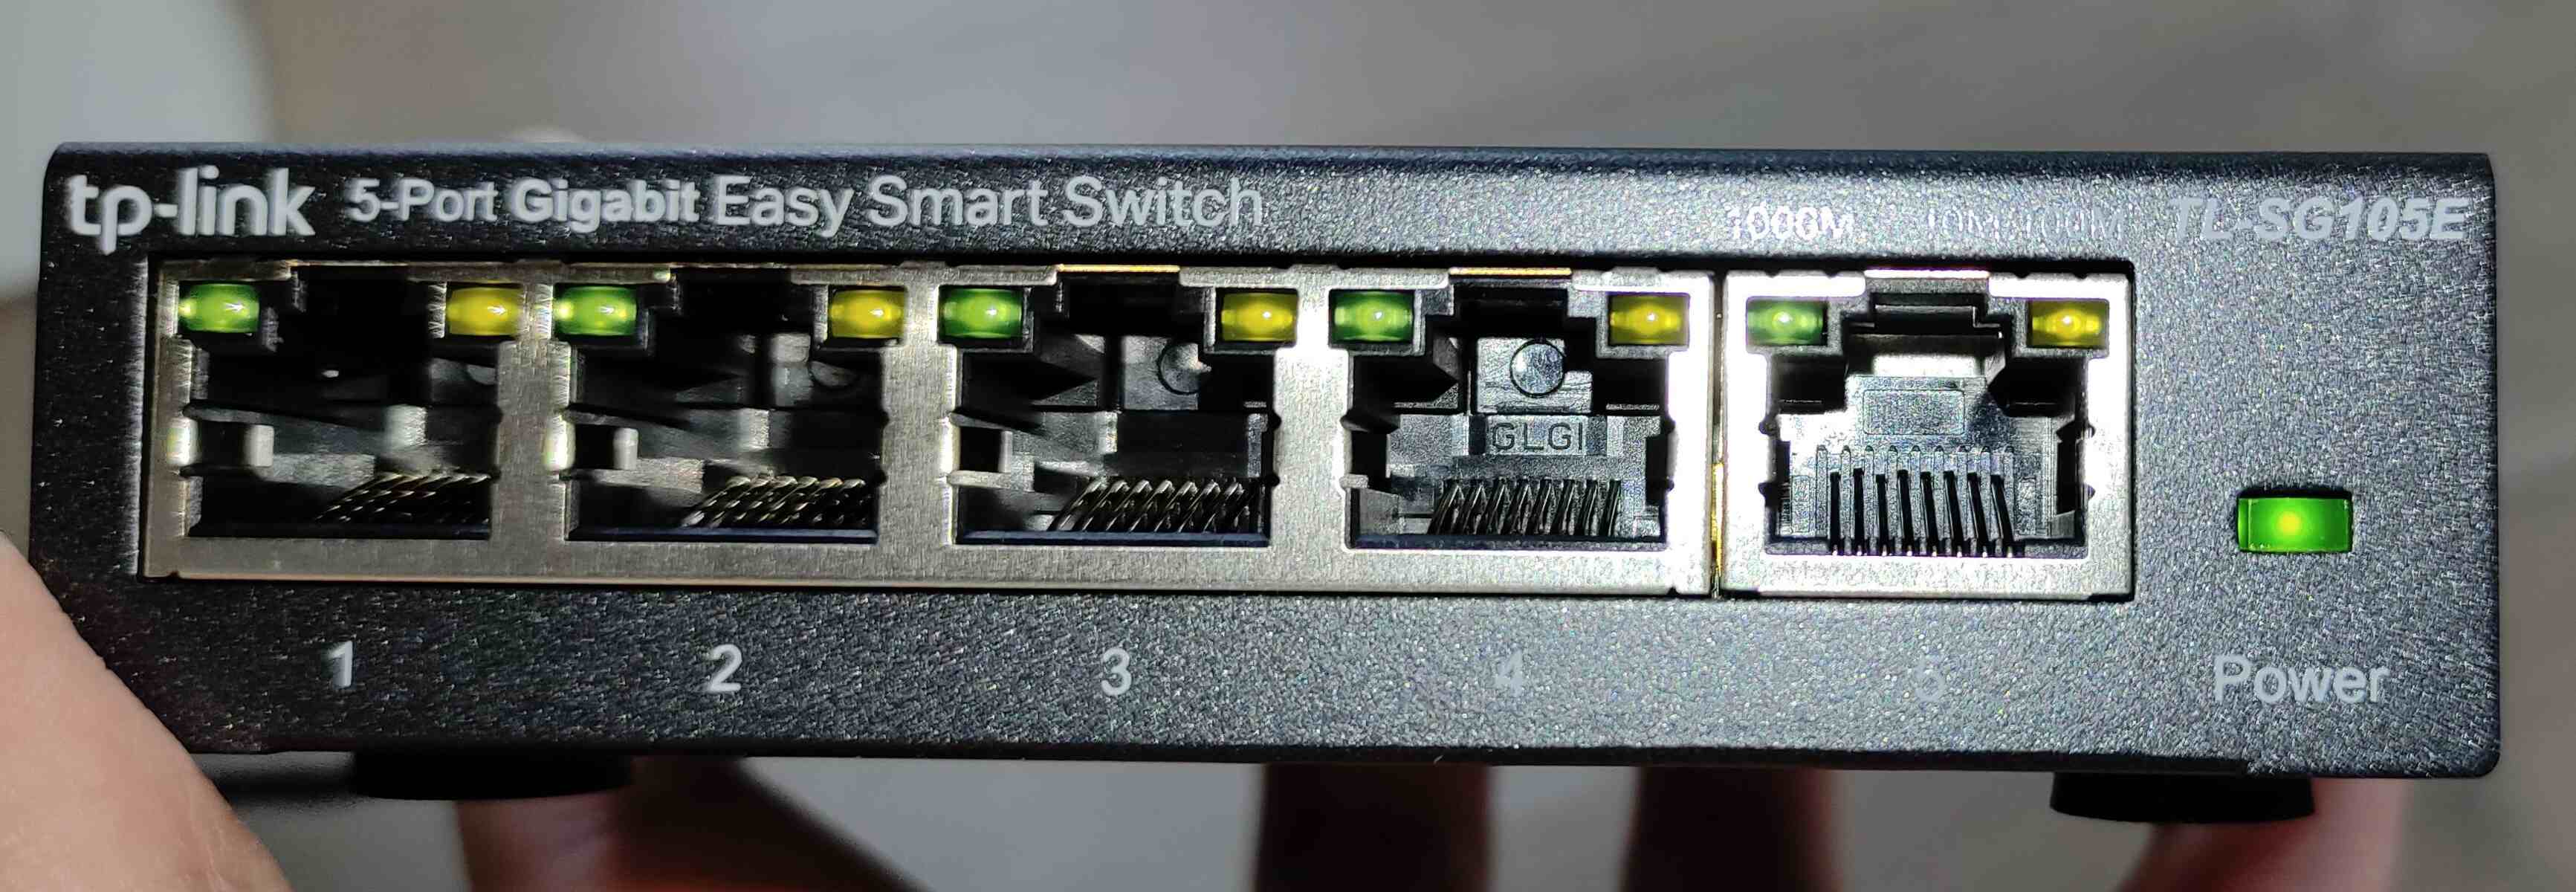 How To Identify Ports On A Network Switch, Router, And Server